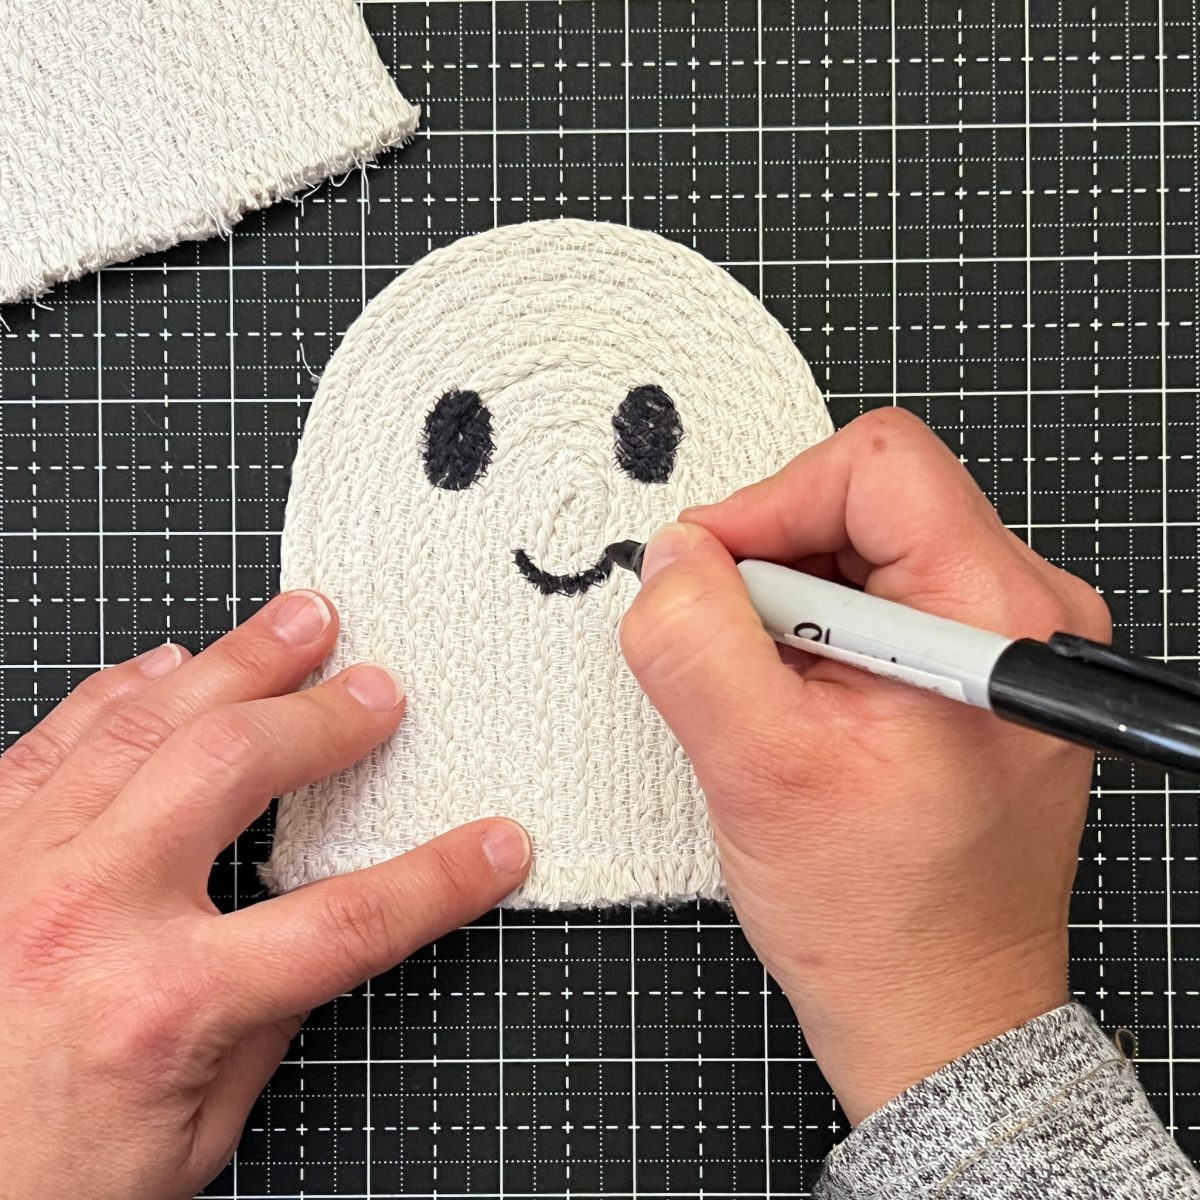 Ghosters Rope Coasters Tutorial - Draw your ghost face